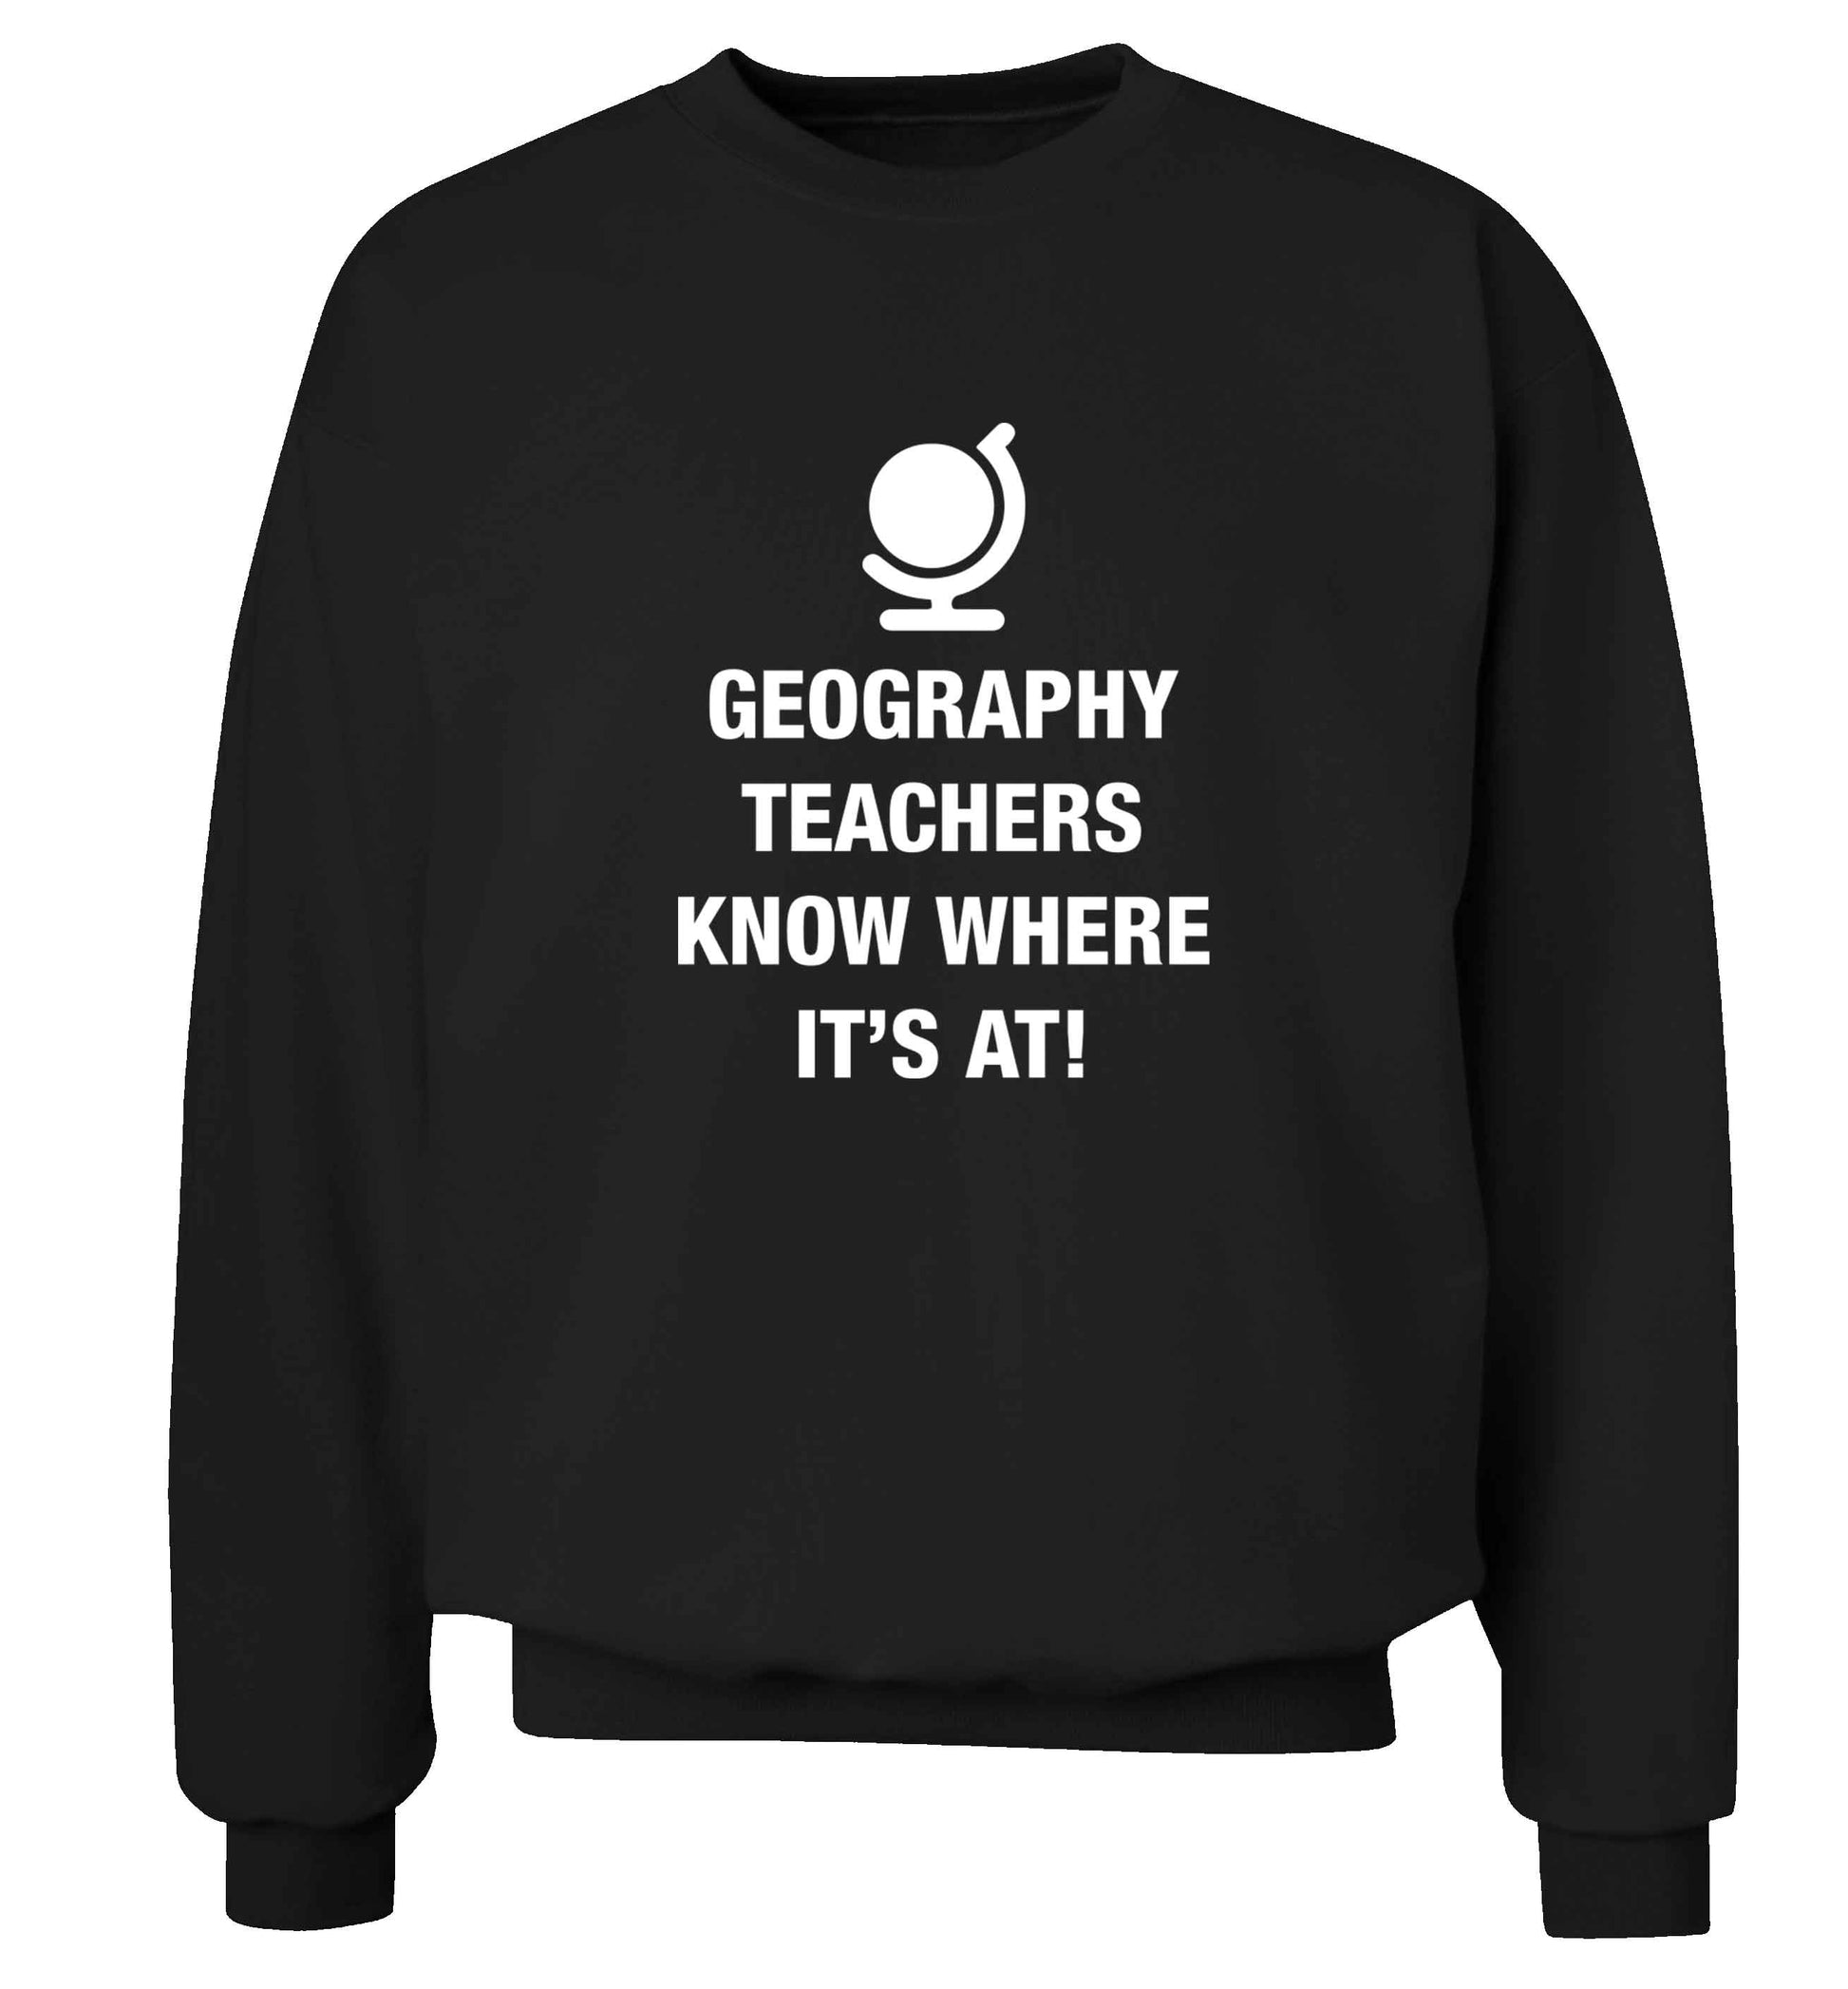 Geography teachers know where it's at adult's unisex black sweater 2XL